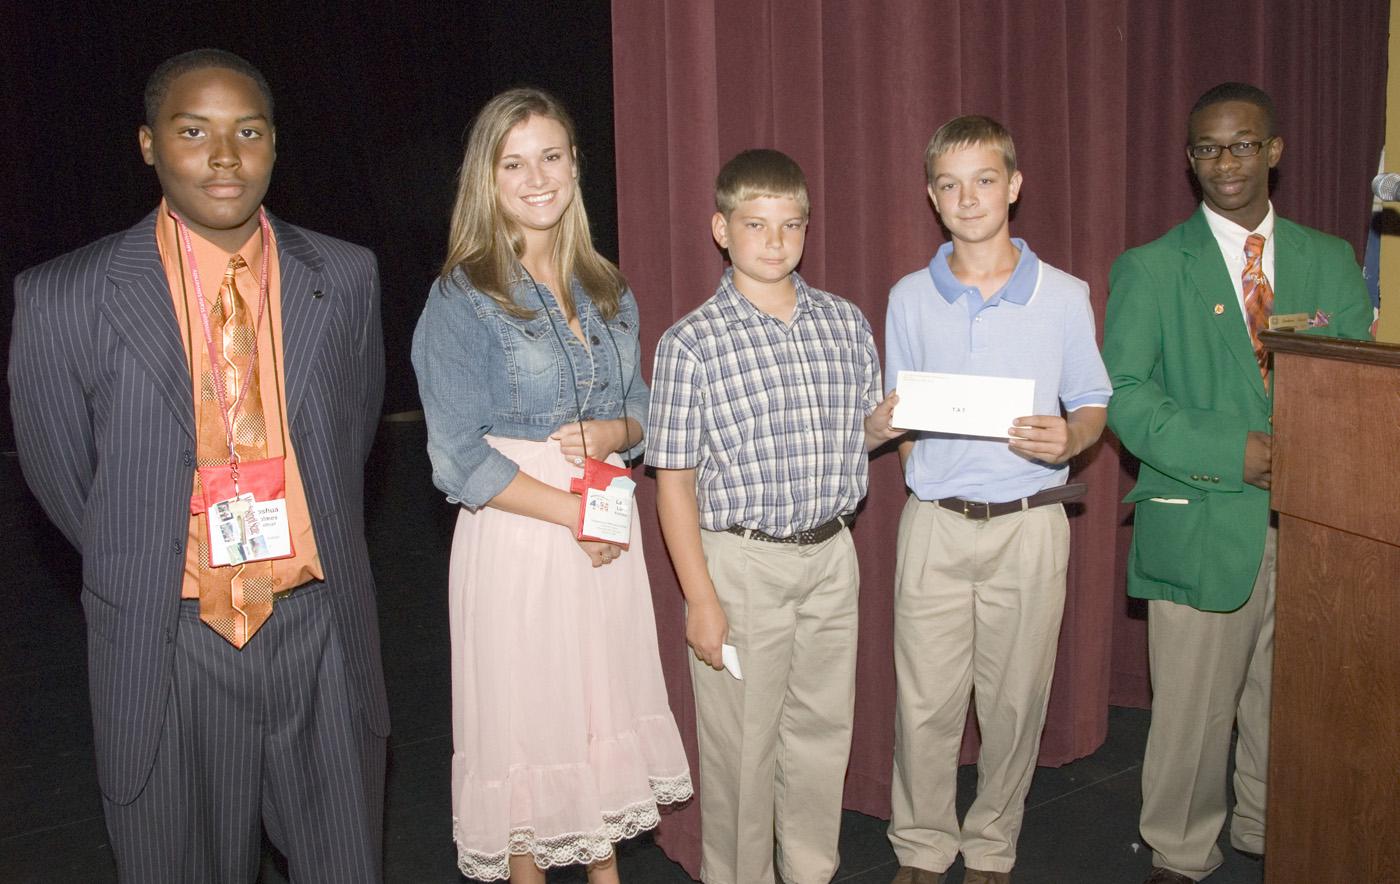 Joshua Holmes of Walthall County, from left, and Laci Lunn of Pontotoc County, represented the state's top two fund-raising counties at the 2007 4-H Congress. They presented a check to Alabama 4-H members Buddy Skipper and Ben Jones, both sixth graders from Enterprise. Leadership Team member Cord Davis of Bolivar County assisted in the presentation. (Photo by Marco Nicovich/MSU Ag Communications) Larger view.